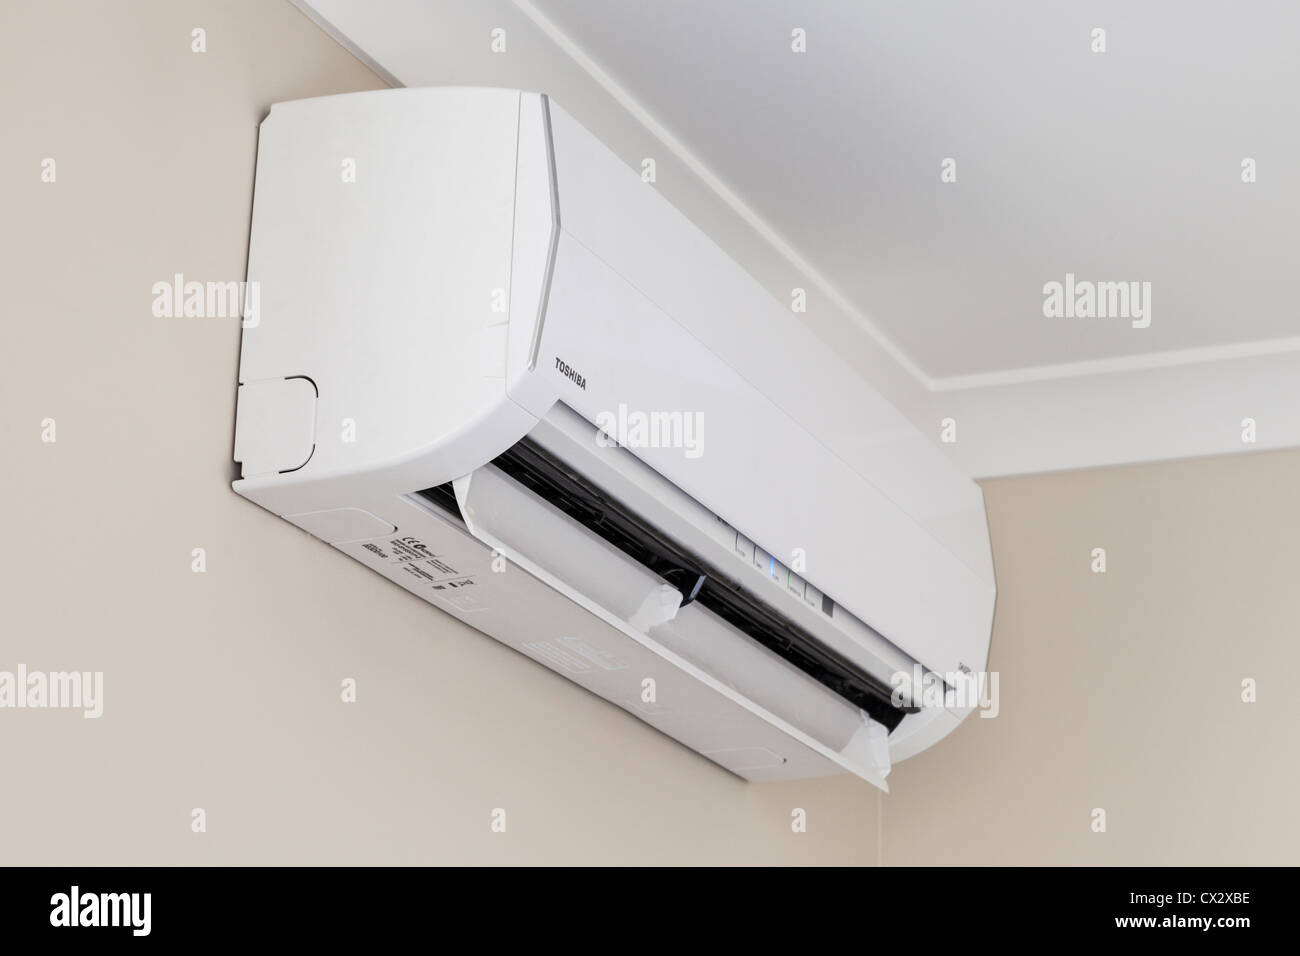 Toshiba heat pump, or reverse cycle air conditioner, installed high on a wall and running. Stock Photo